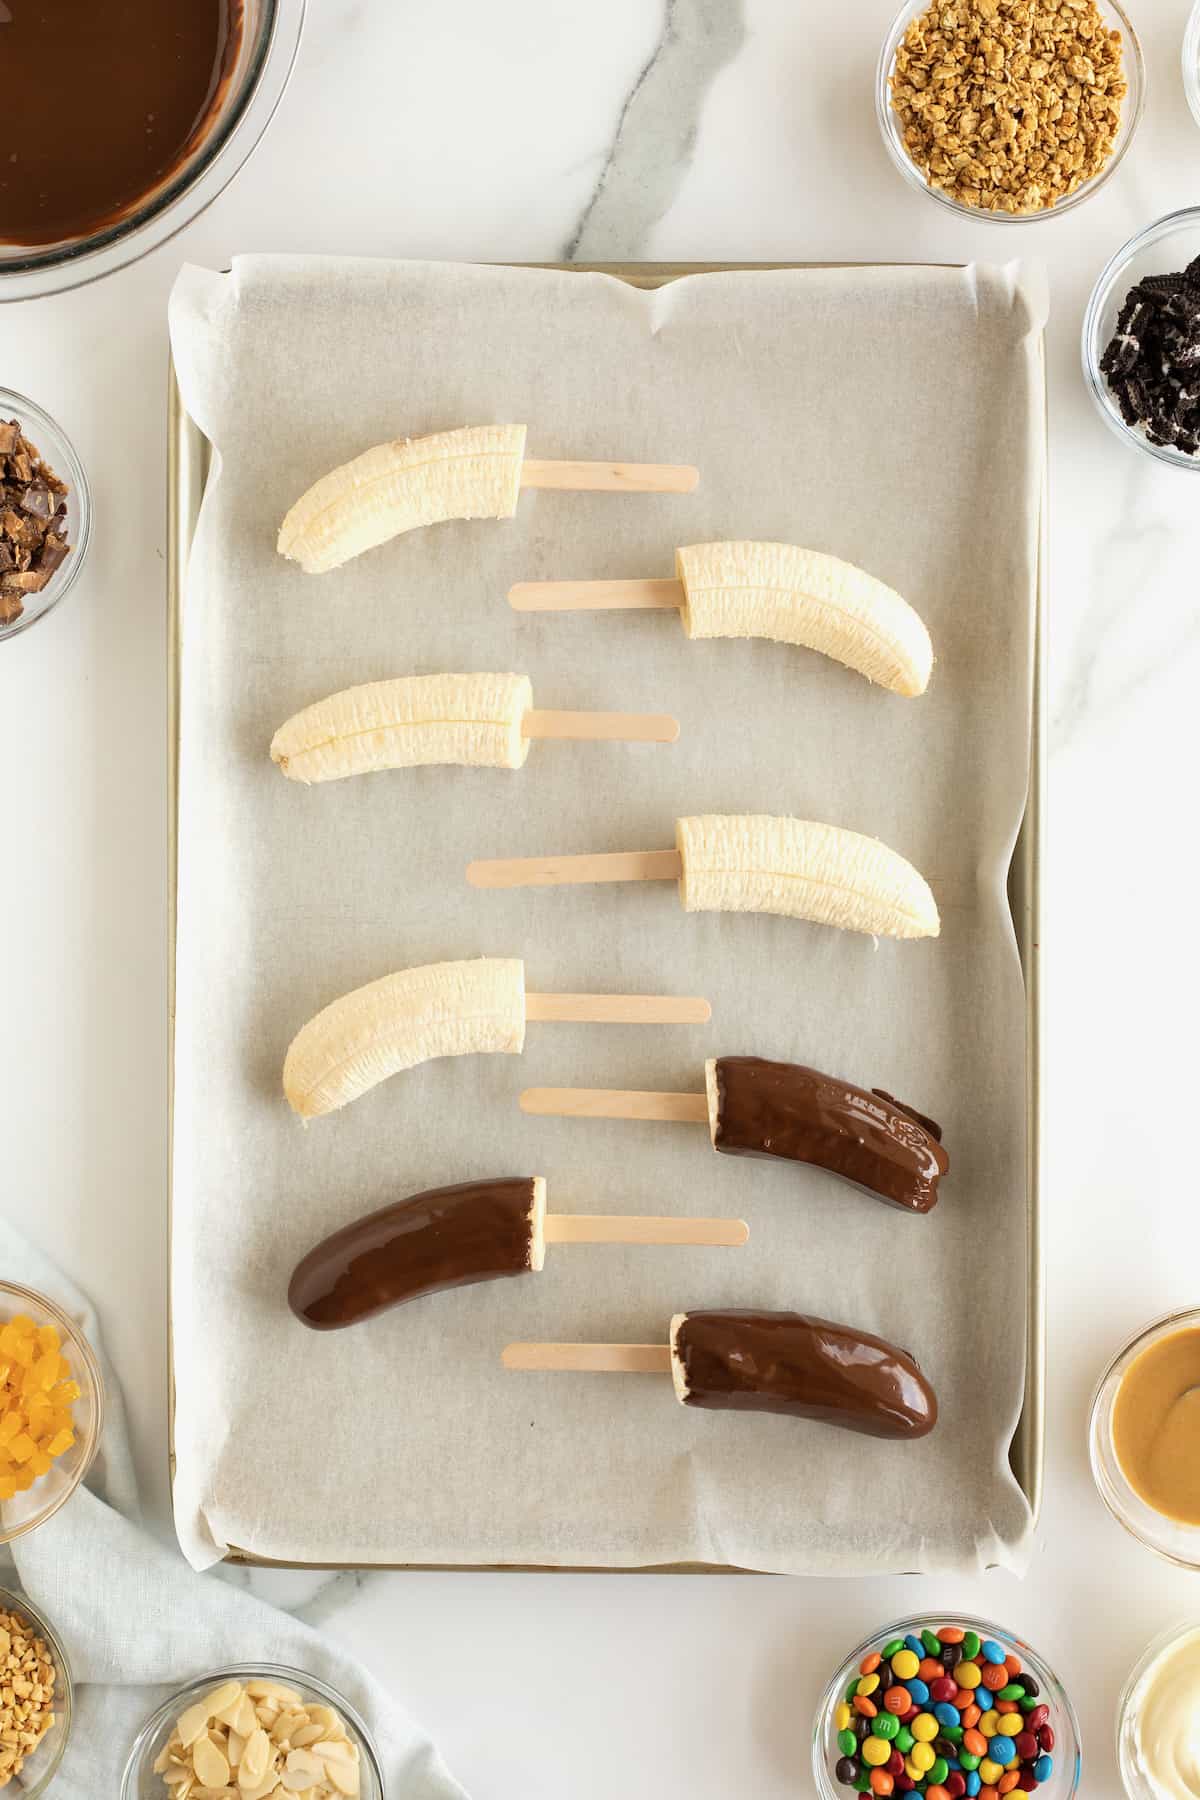 Bananas on popsicles sticks covered in melted chocolate on a parchment lined baking tray.